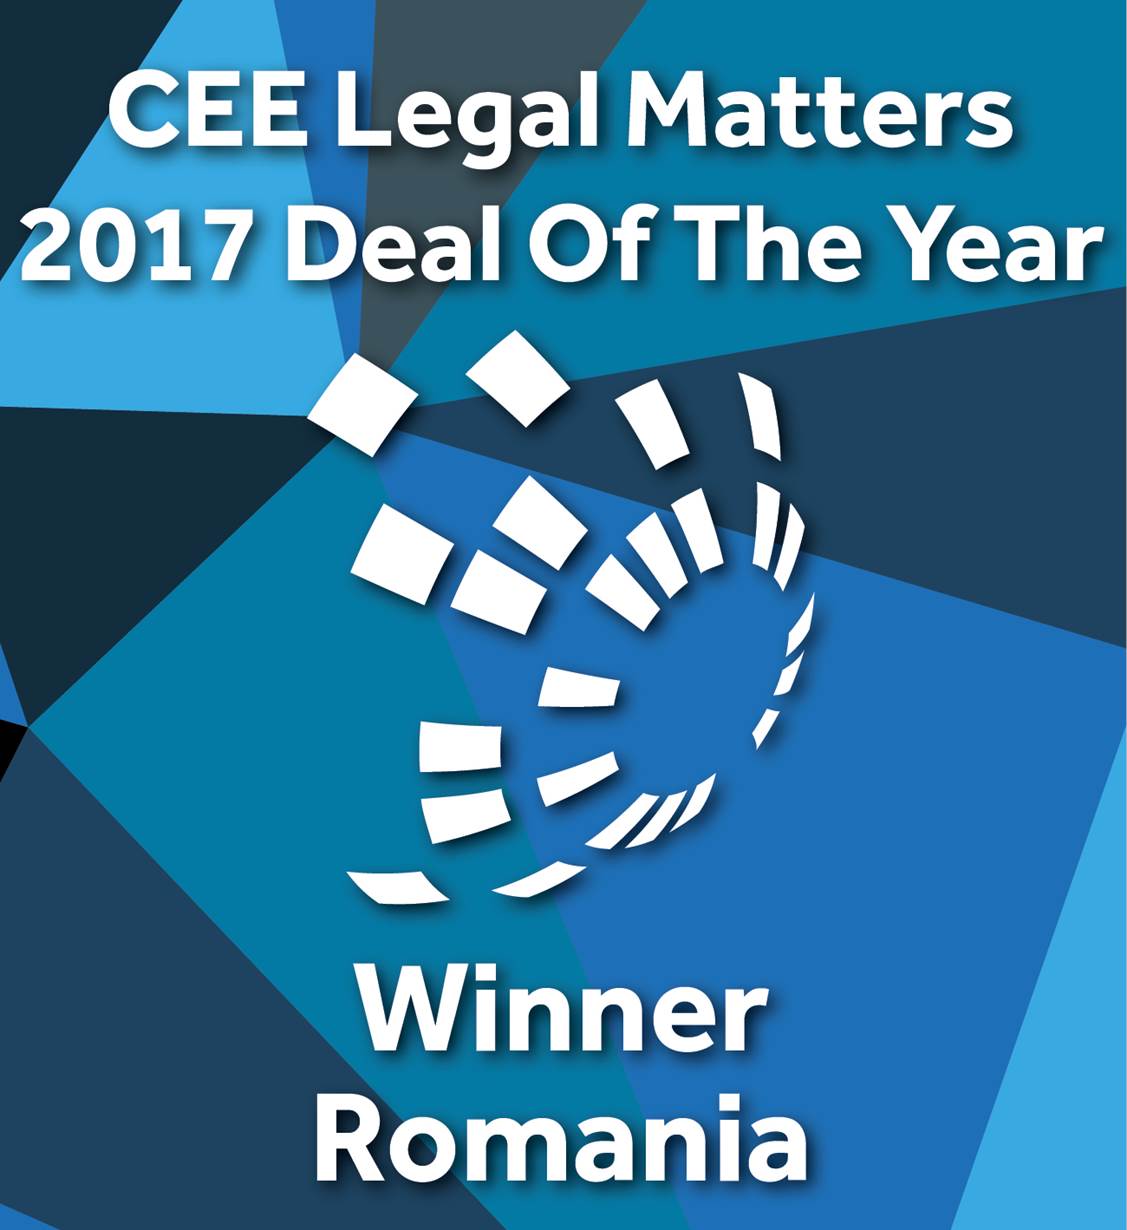 Cee Legal Matters Deal Of The Year Romania